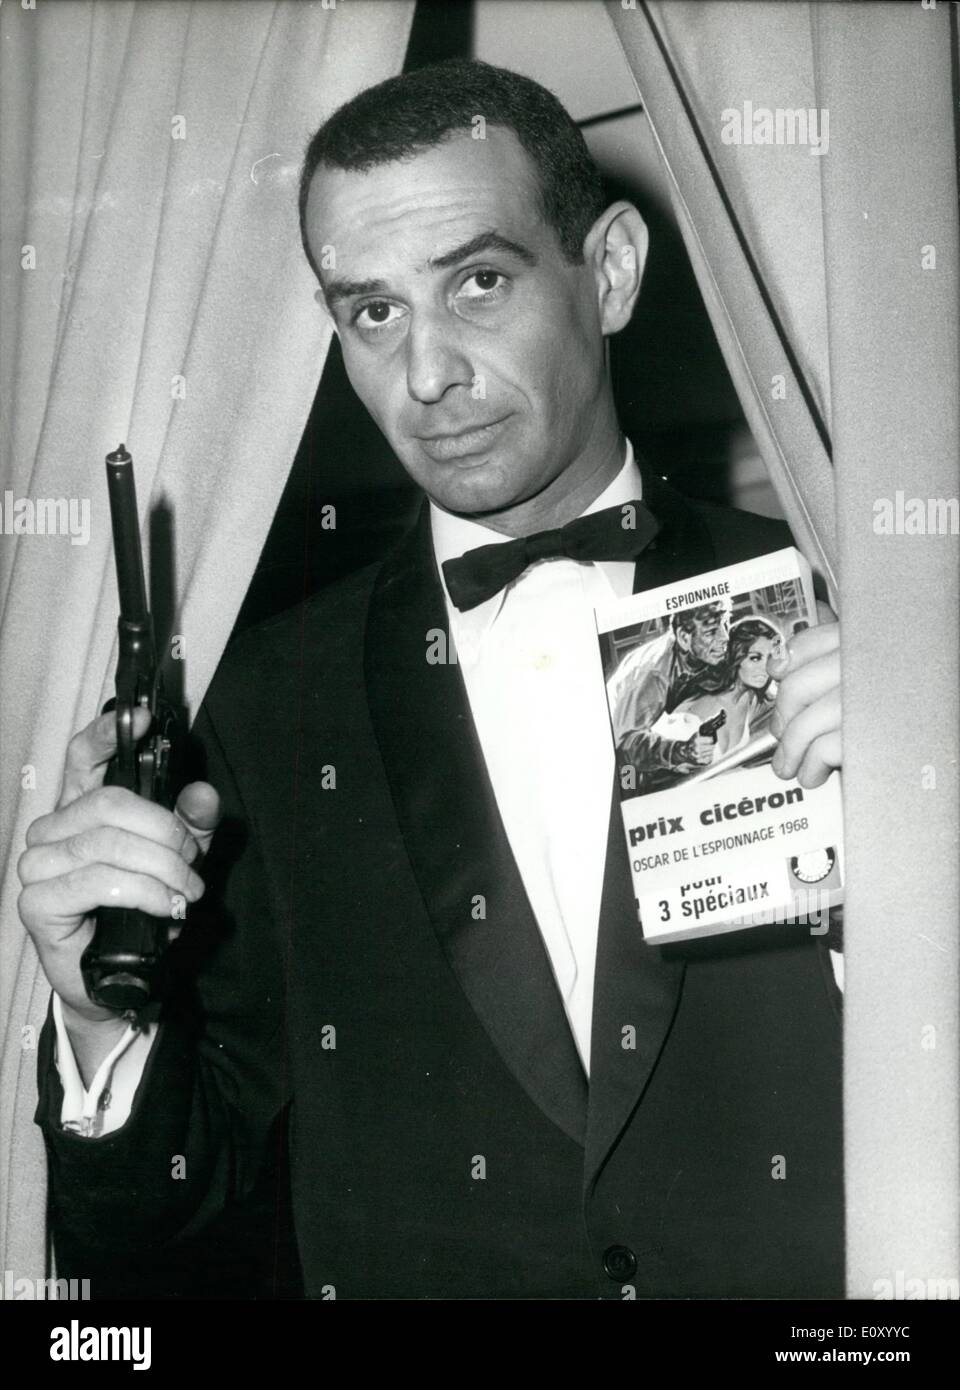 Feb. 02, 1968 - Spy Story of the year: Gerard Cambri, 40-year-old French author of Detective Novels, was awarded the 'Cicero' Oscar for the best spy story of the year. Photo shows holding a pistol in one hand to give himself a 'Spy' toucn and his book 'Sarabande Pour Trois Speciaux' in the other Gerard Cambri poses for the press. Stock Photo